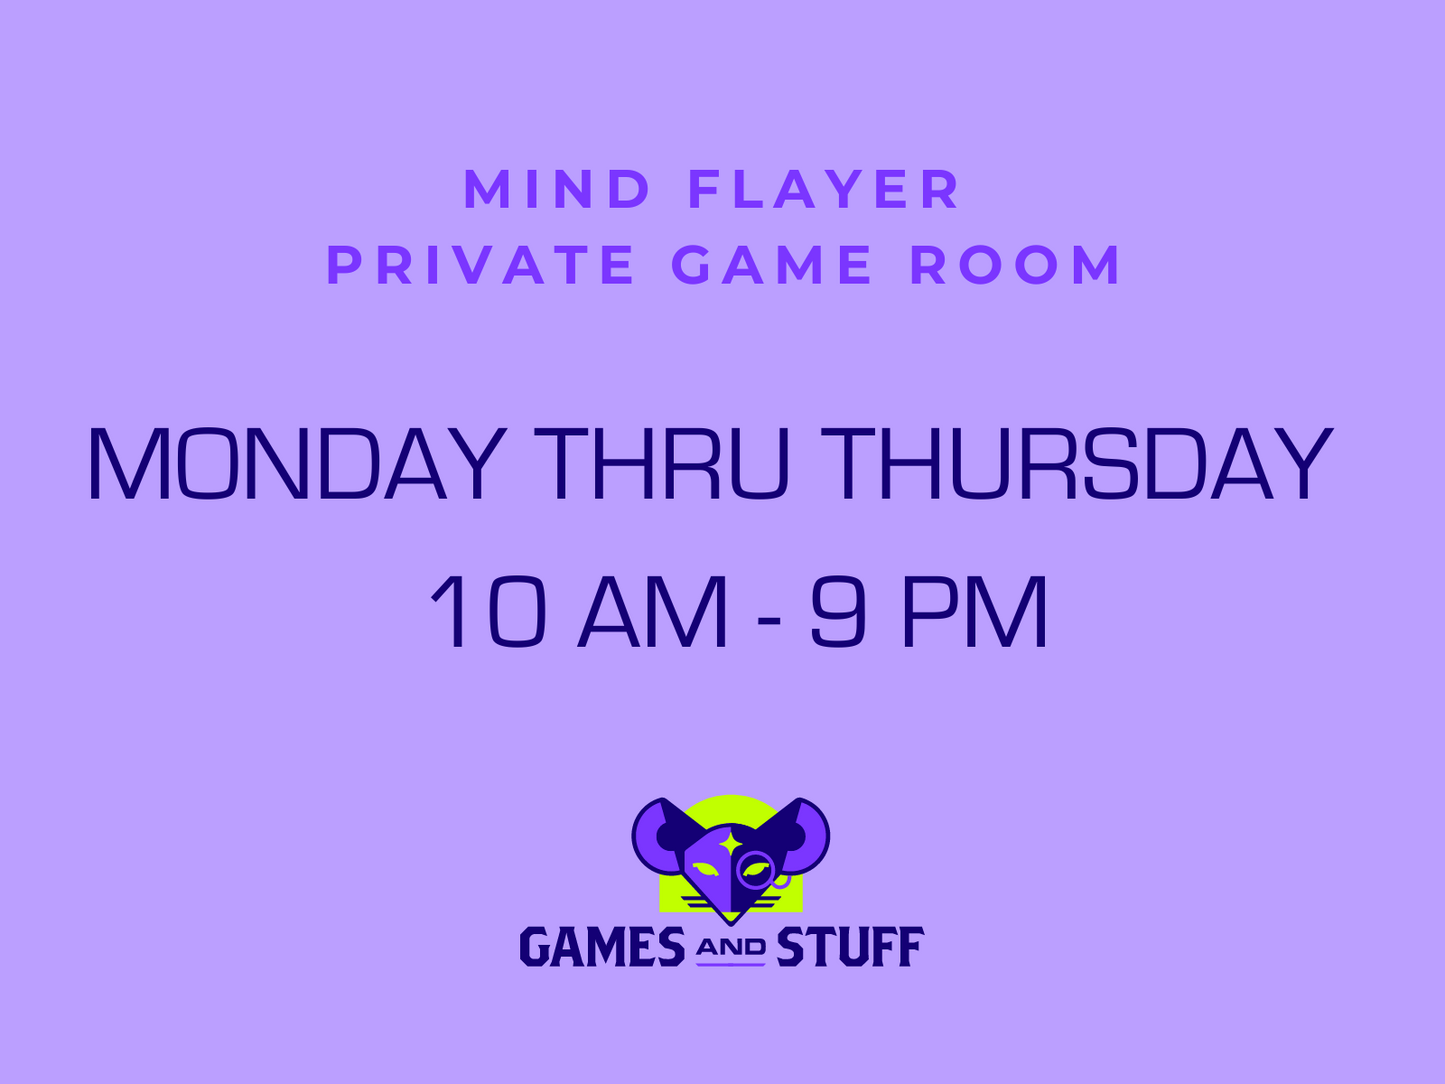 MIND FLAYER PRIVATE GAME ROOM - MONDAY THRU THURSDAY ALL DAY